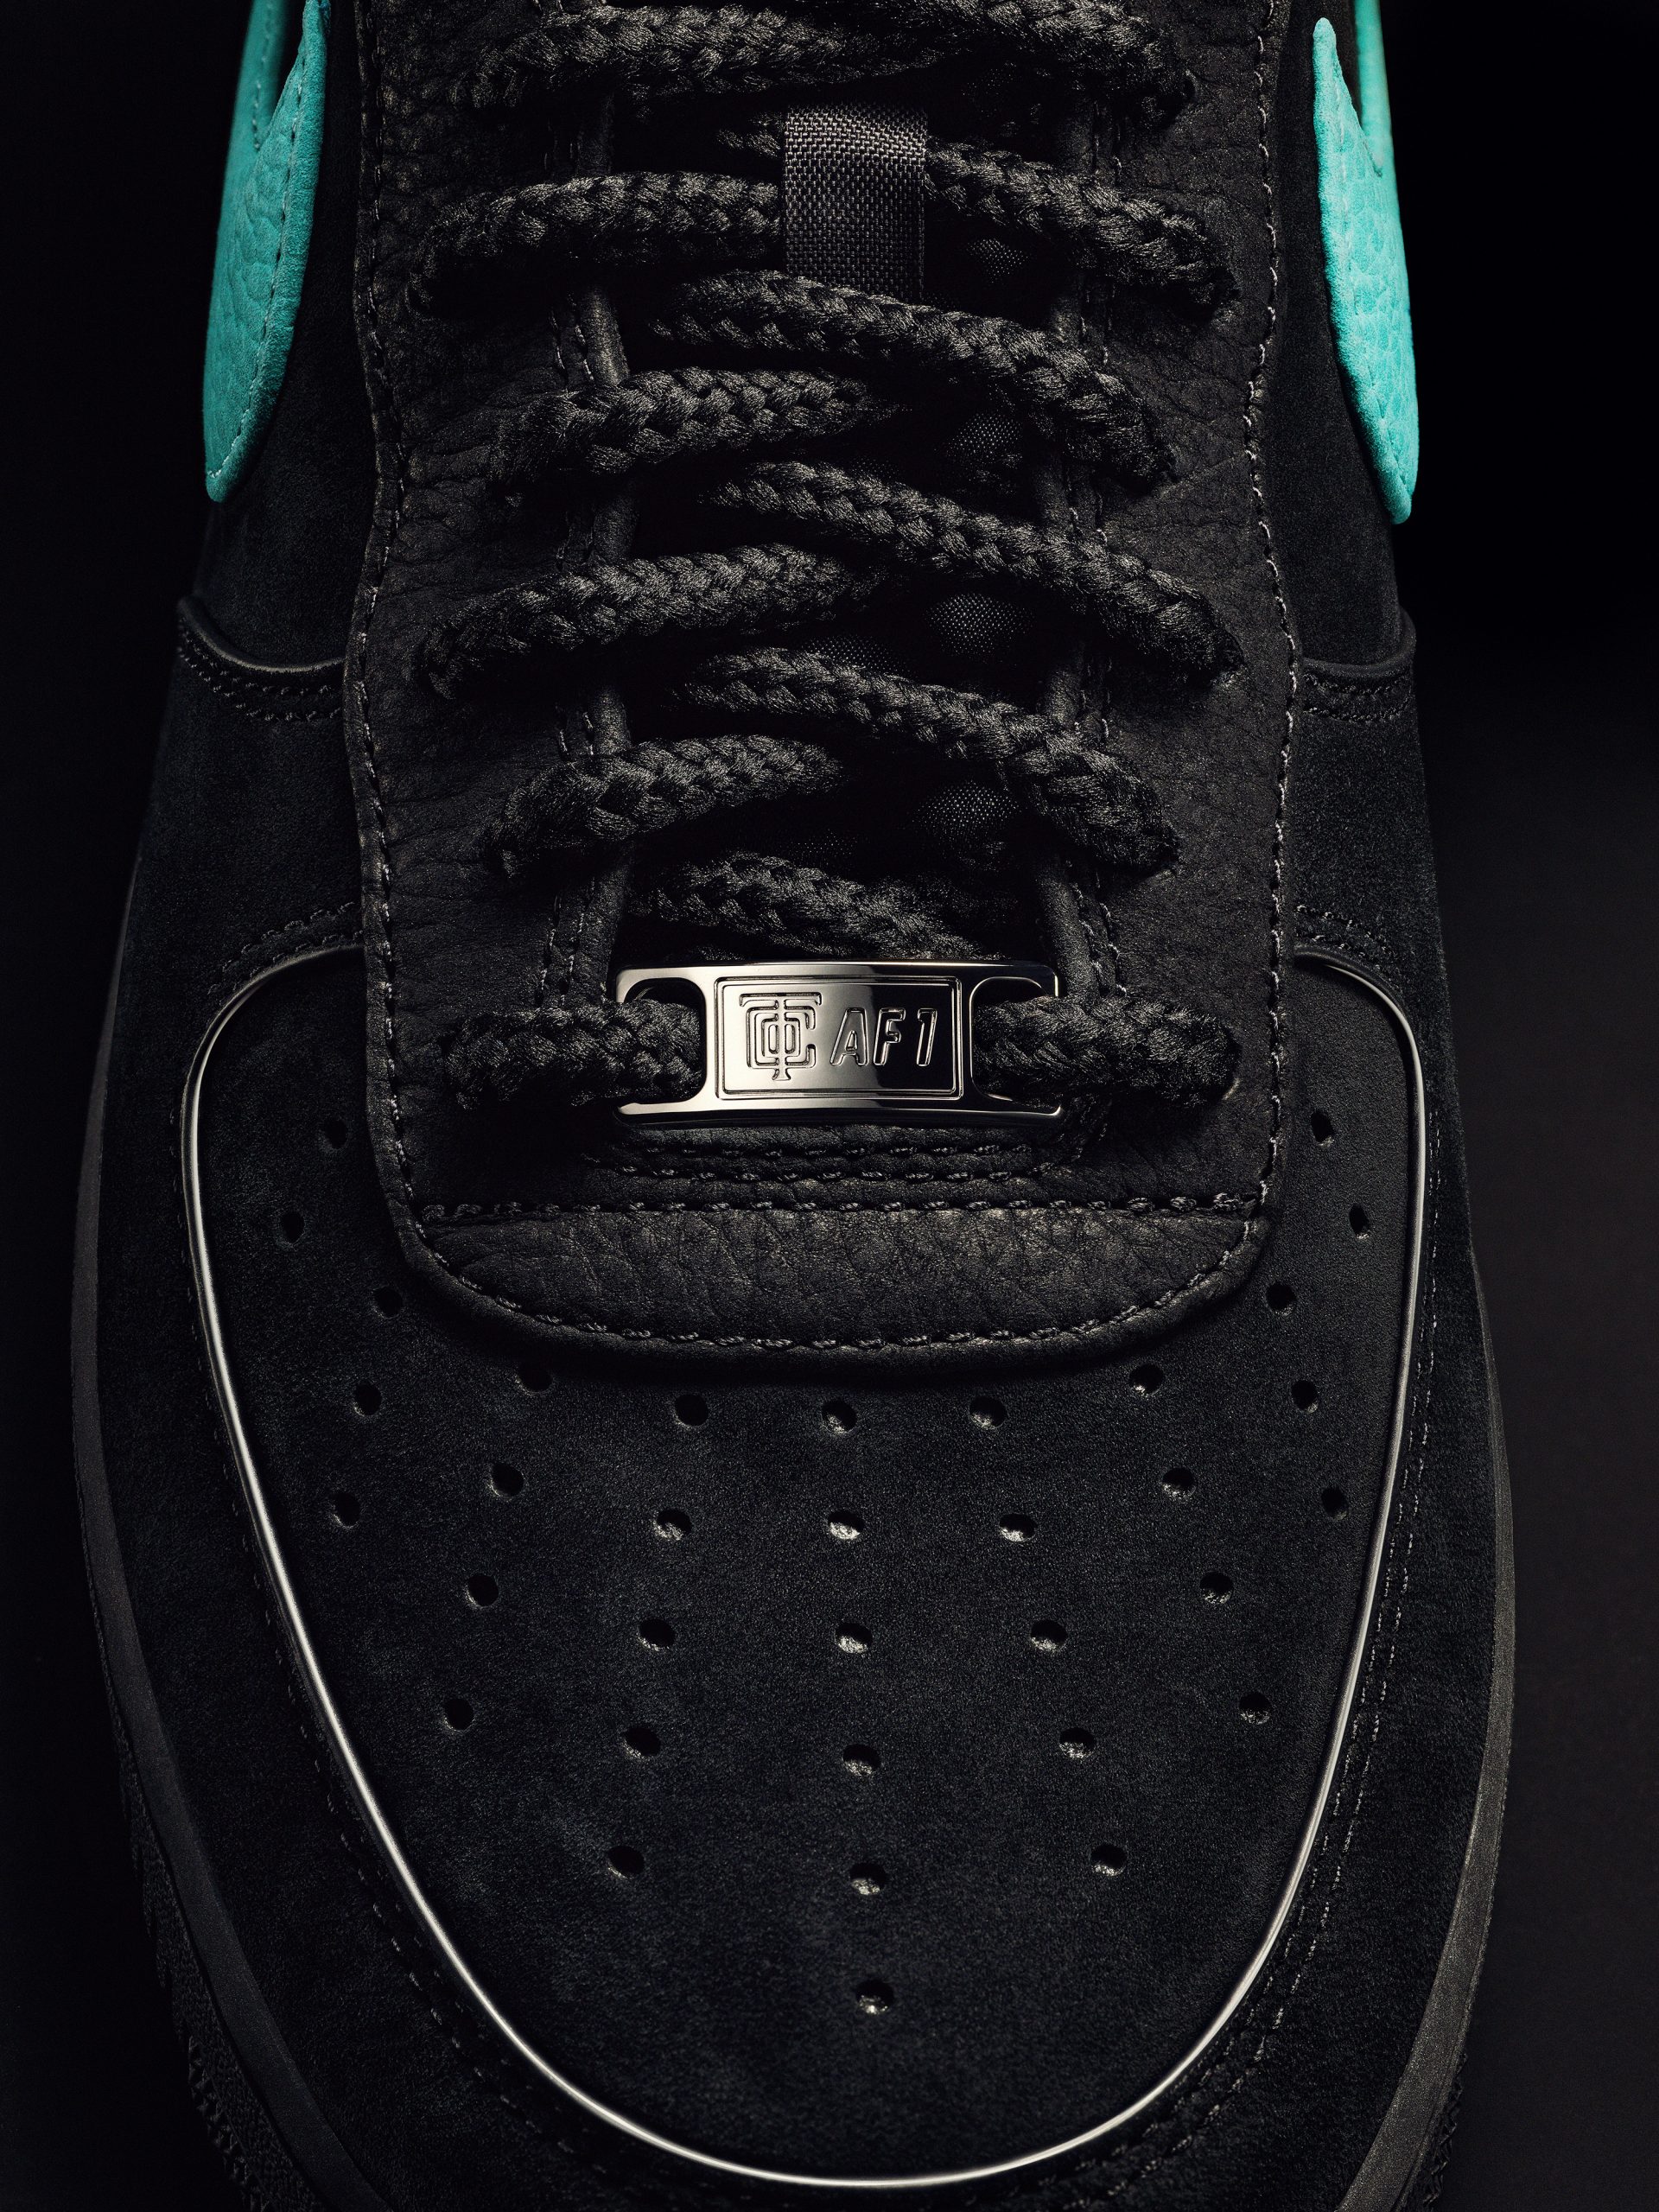 Tiffany & Co. and Nike Team Up For a Legendary Debut of the